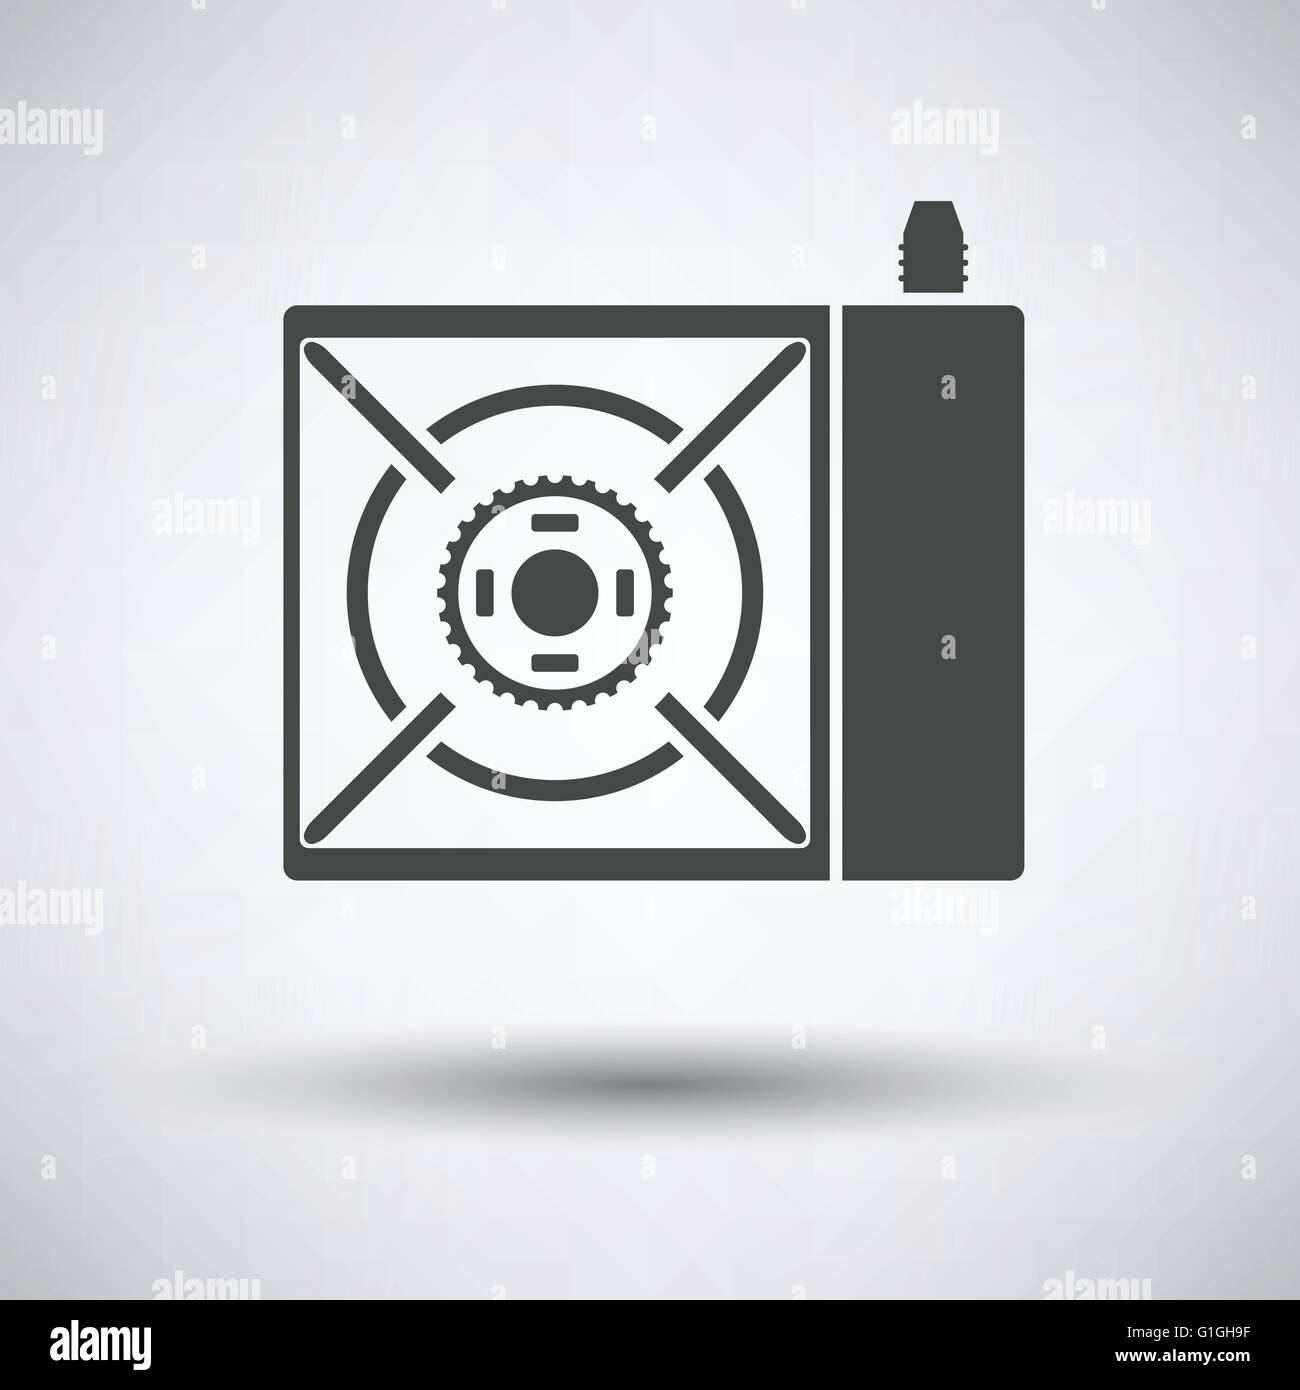 Camping gas burner stove icon on gray background with round shadow. Vector illustration. Stock Vector